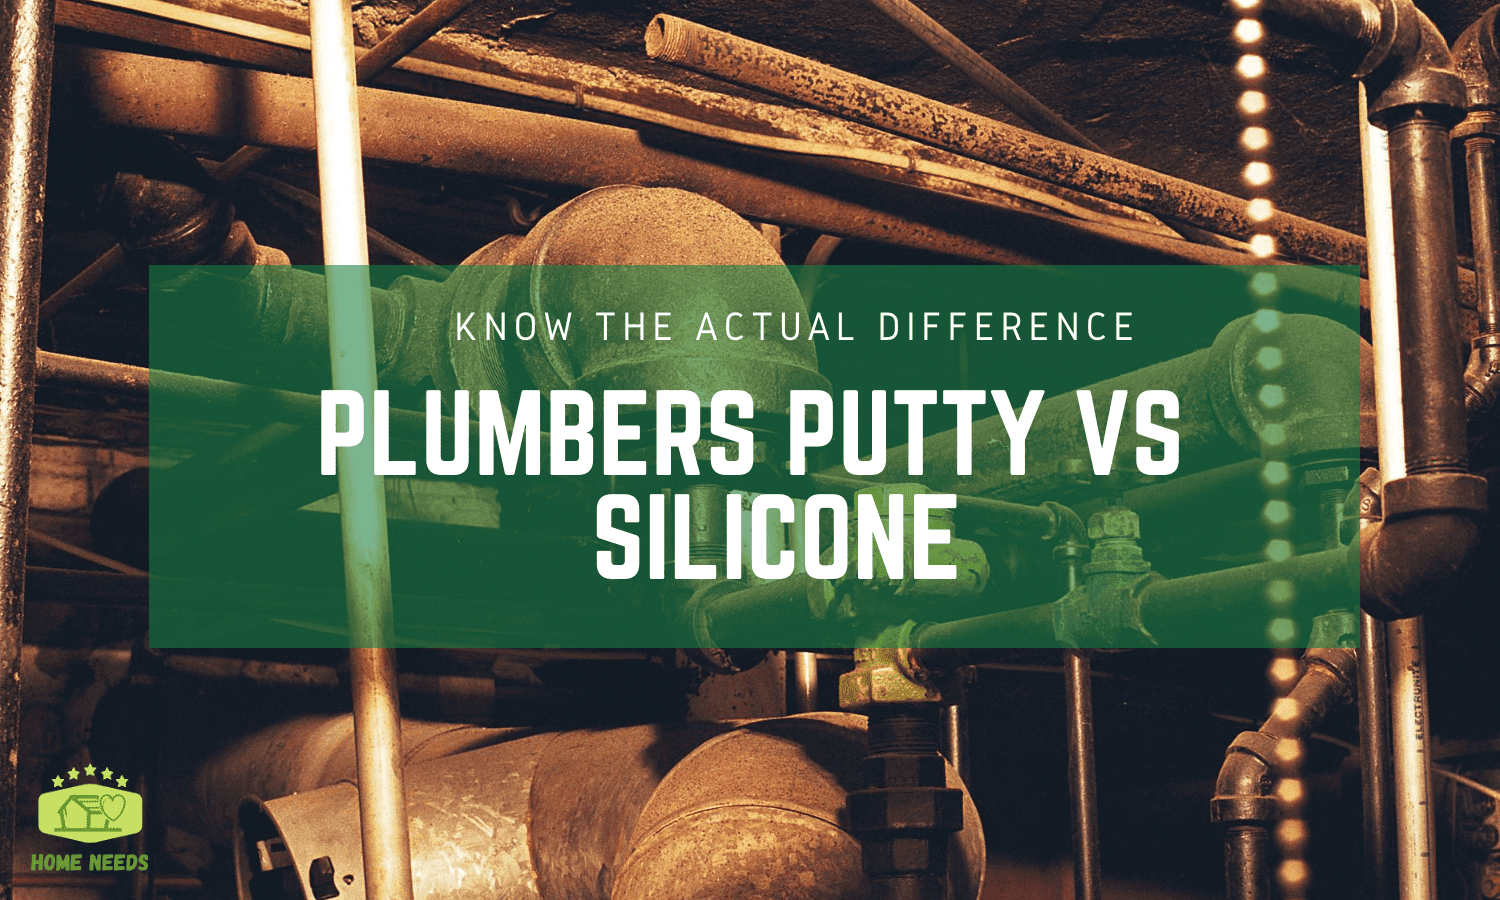 Plumbers Putty vs Silicone Know the Actual Difference